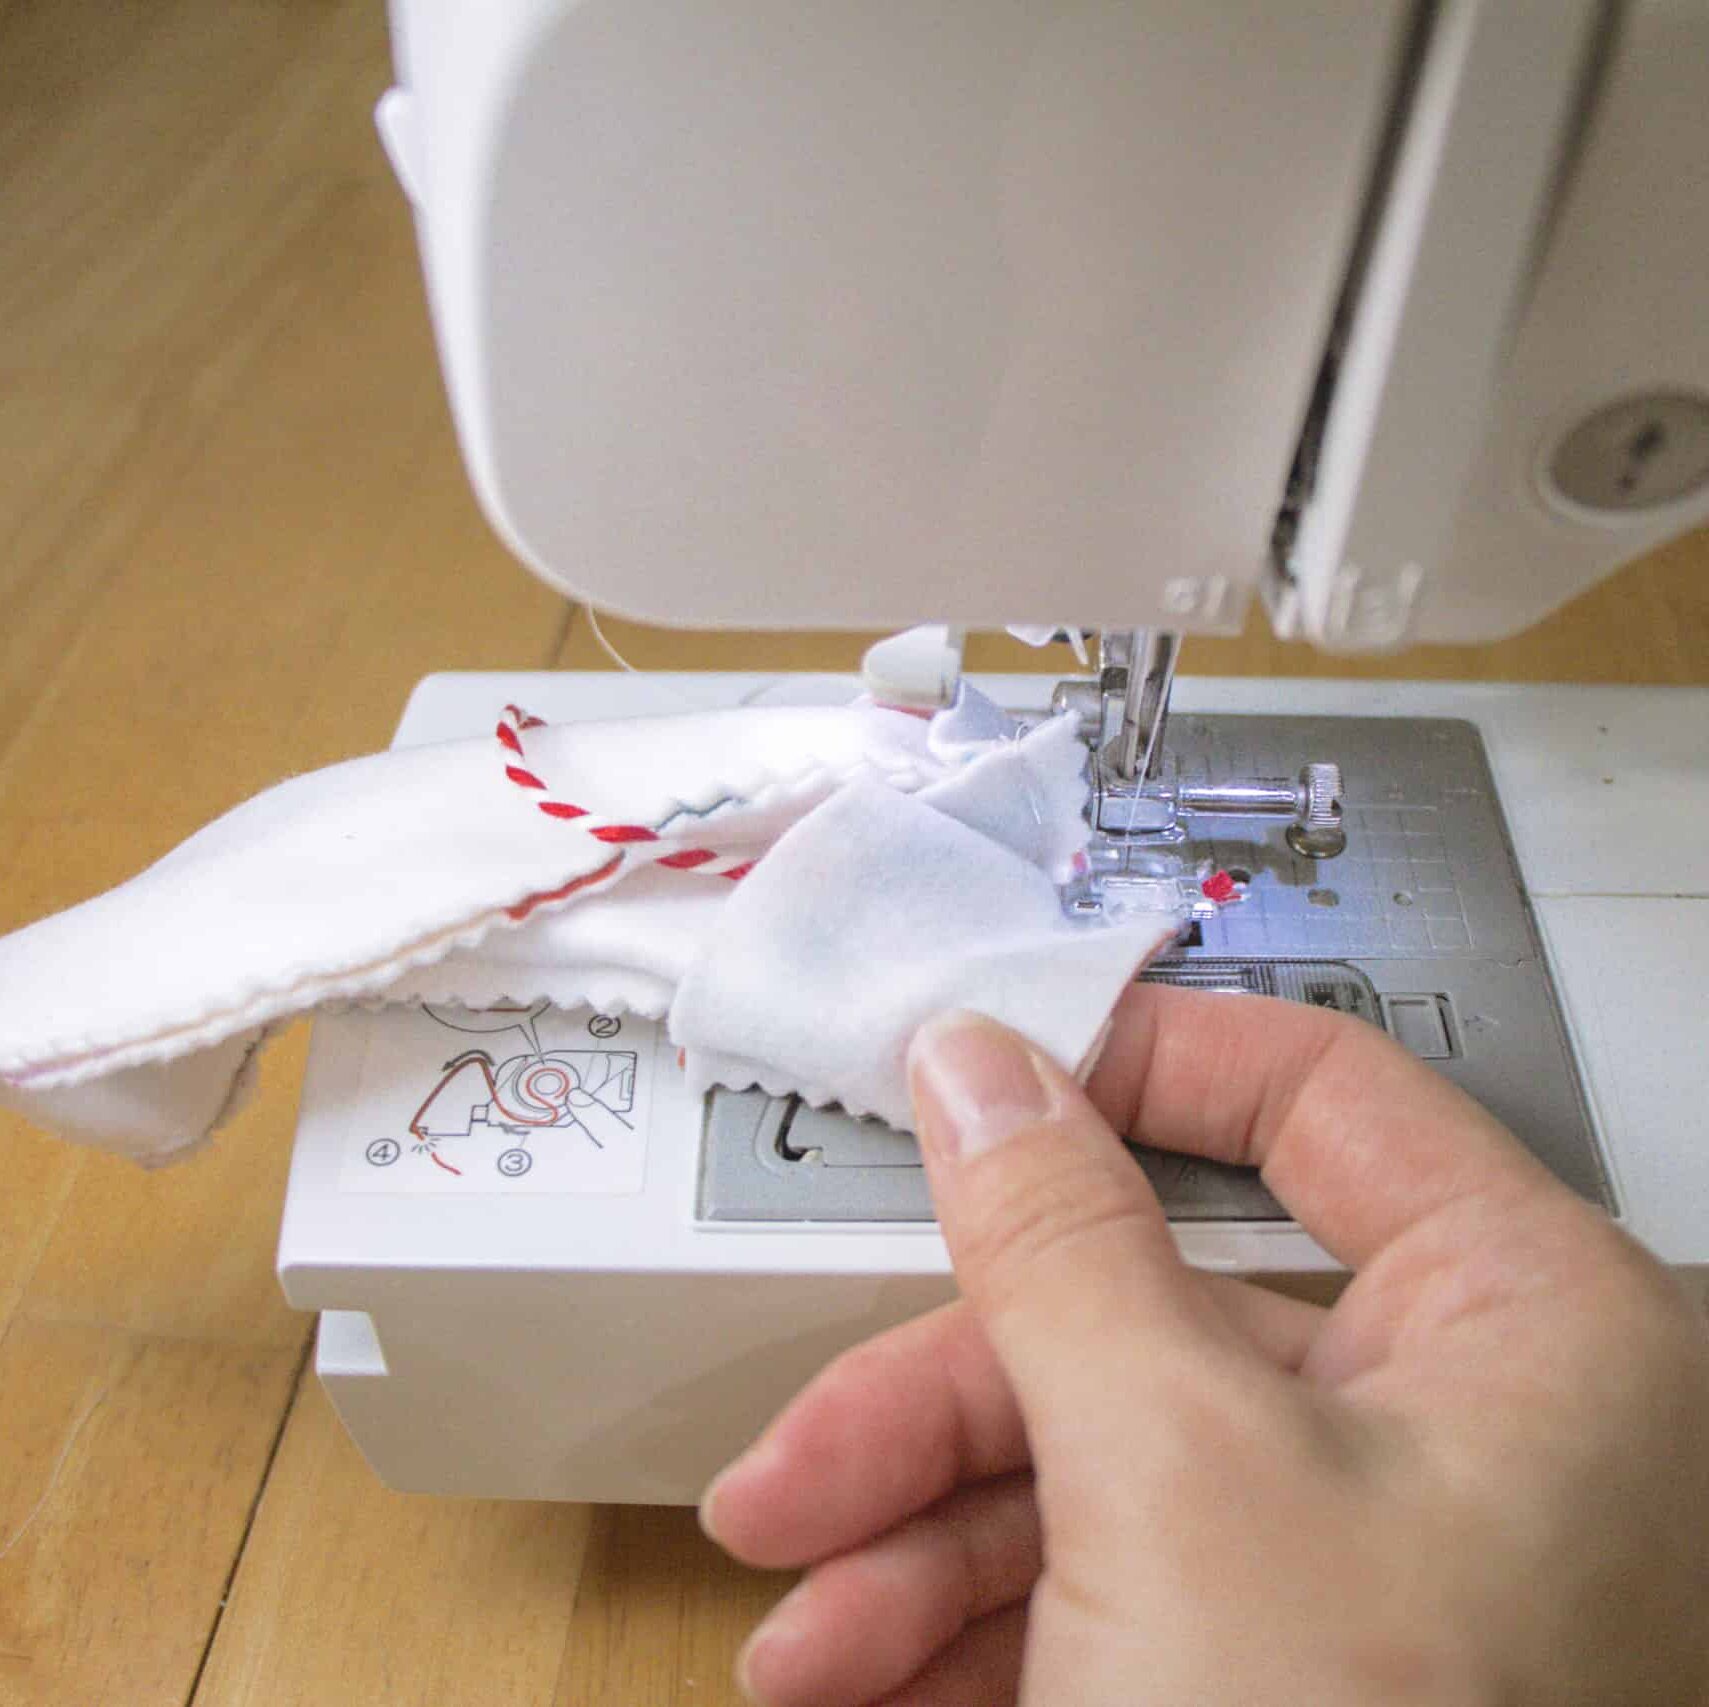 A hand guides the sewing machine carefully as it sews around the top of the stocking,